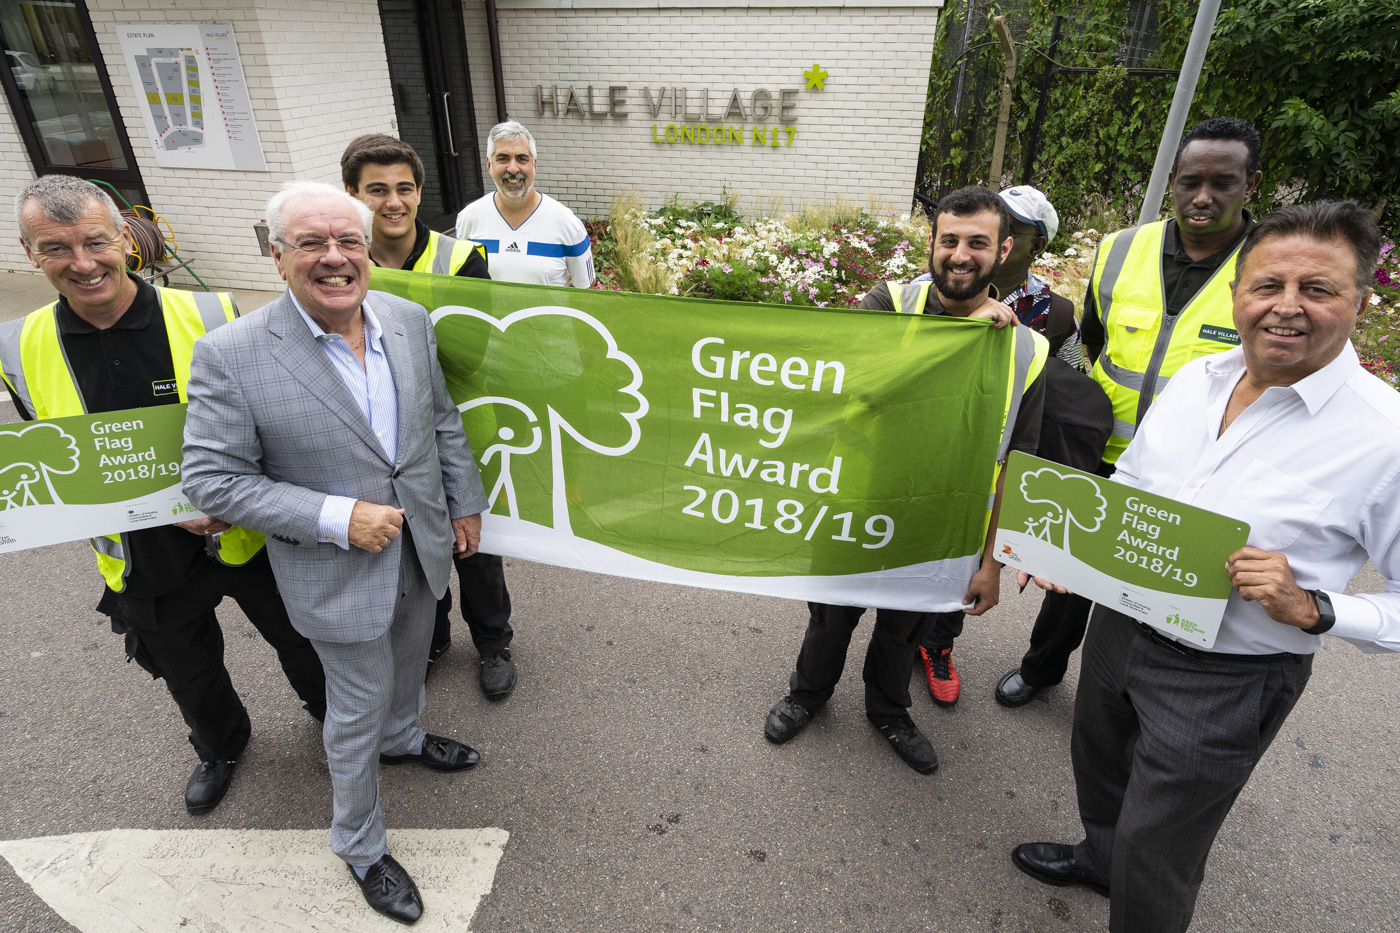 Green Flag Award for the third year running